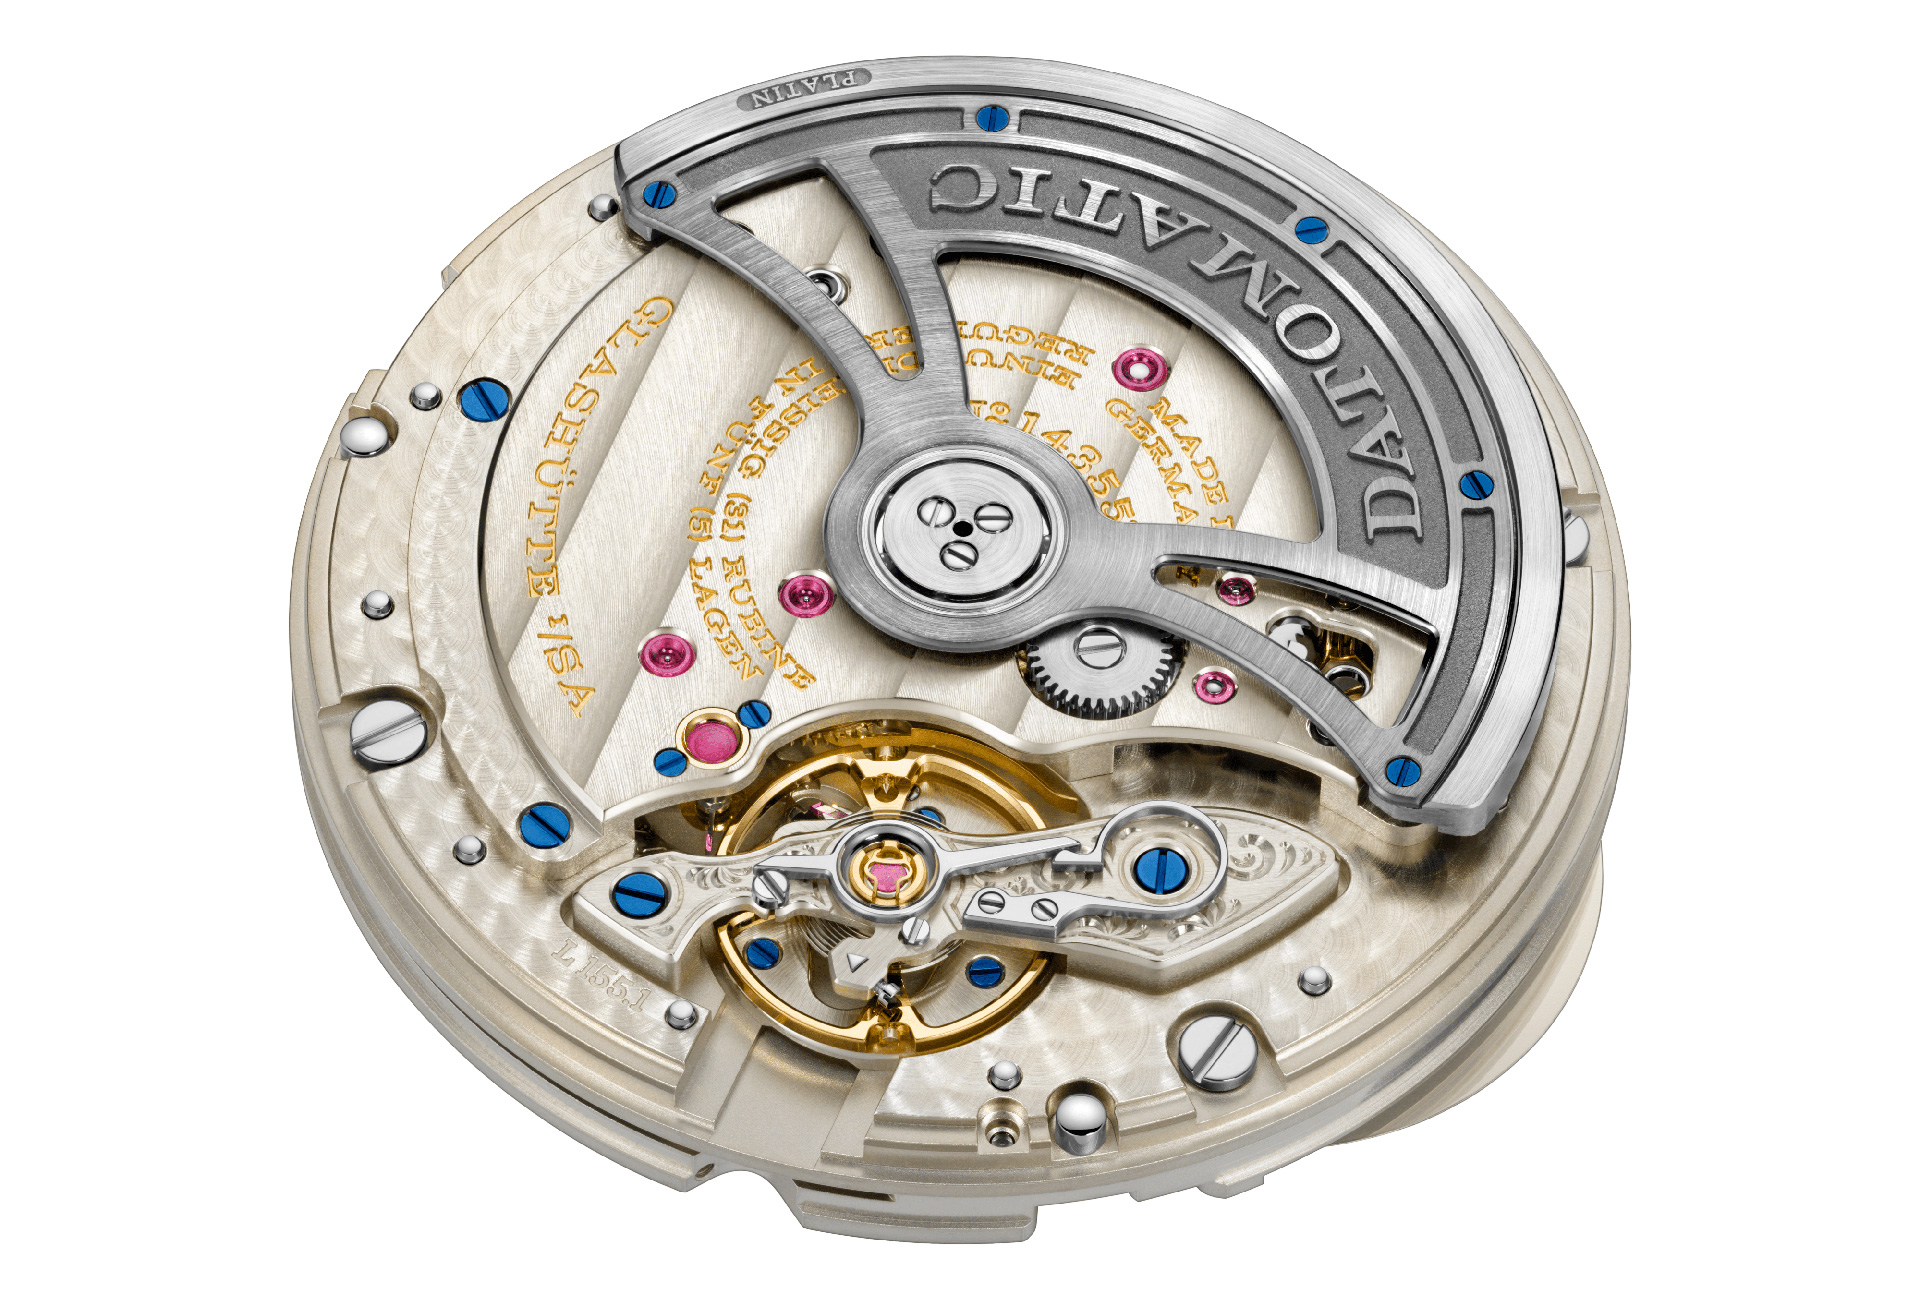 A Look At The A Lange Sohne Odysseus Fhh Journal